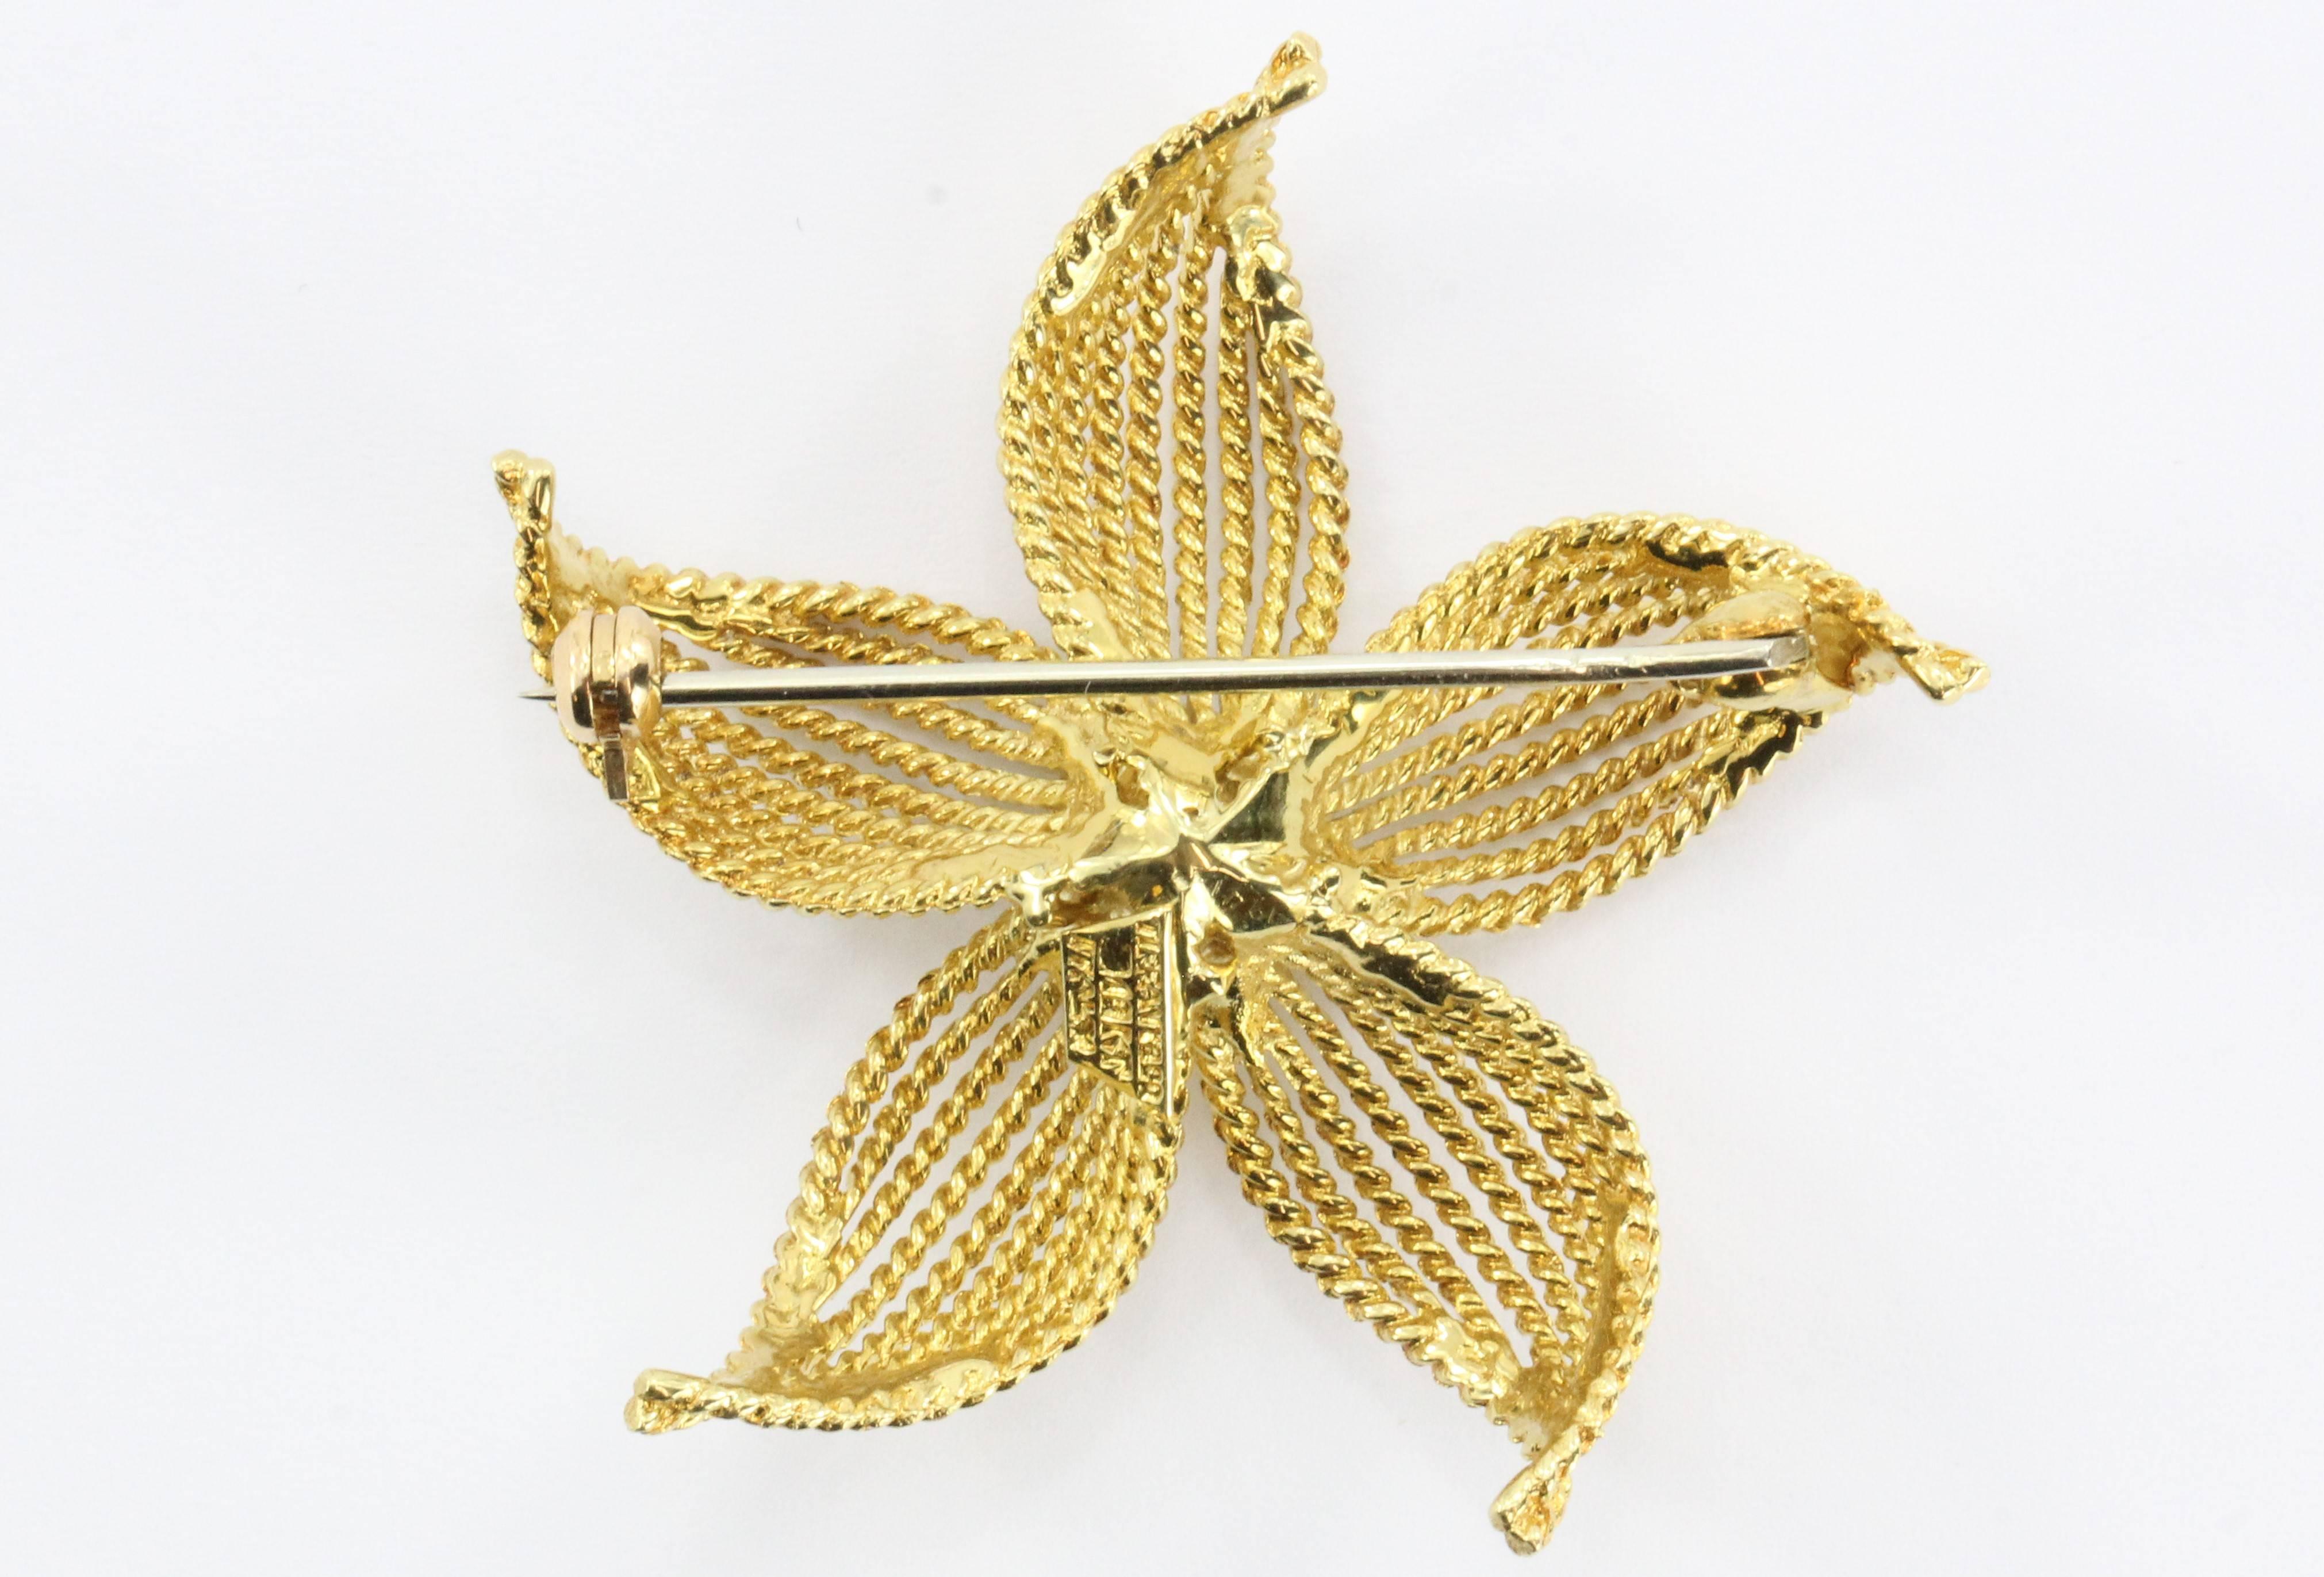 18K Yellow Gold Tiffany & Co Flower Brooch. The piece is in excellent estate condition, ready to wear. It is signed Tiffany & Co. 18K Italy. 

The piece measures 1.75" x 1.75" and weighs a total of 12.9 grams